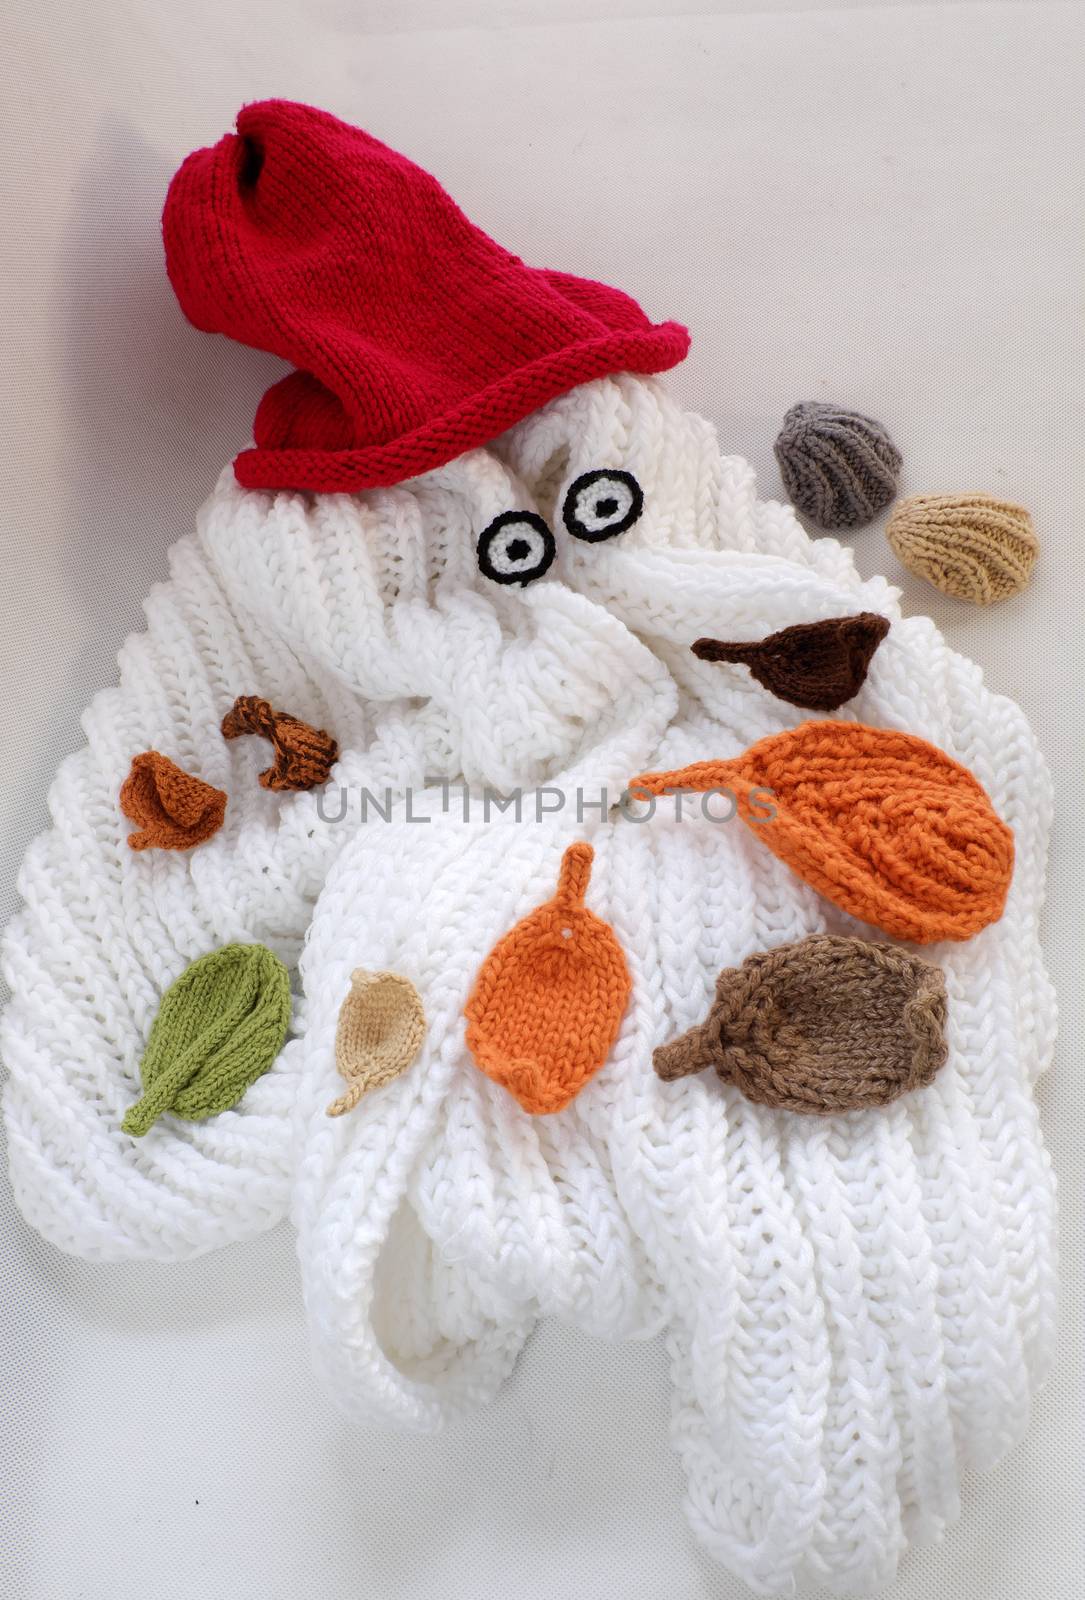 Diy funny, humor Christmas background handmade with lazy snowman from white scarf, red hat, eye and group of knitted leaf from yarn, winter leaves drop on head in cold day, art design for Xmas holiday